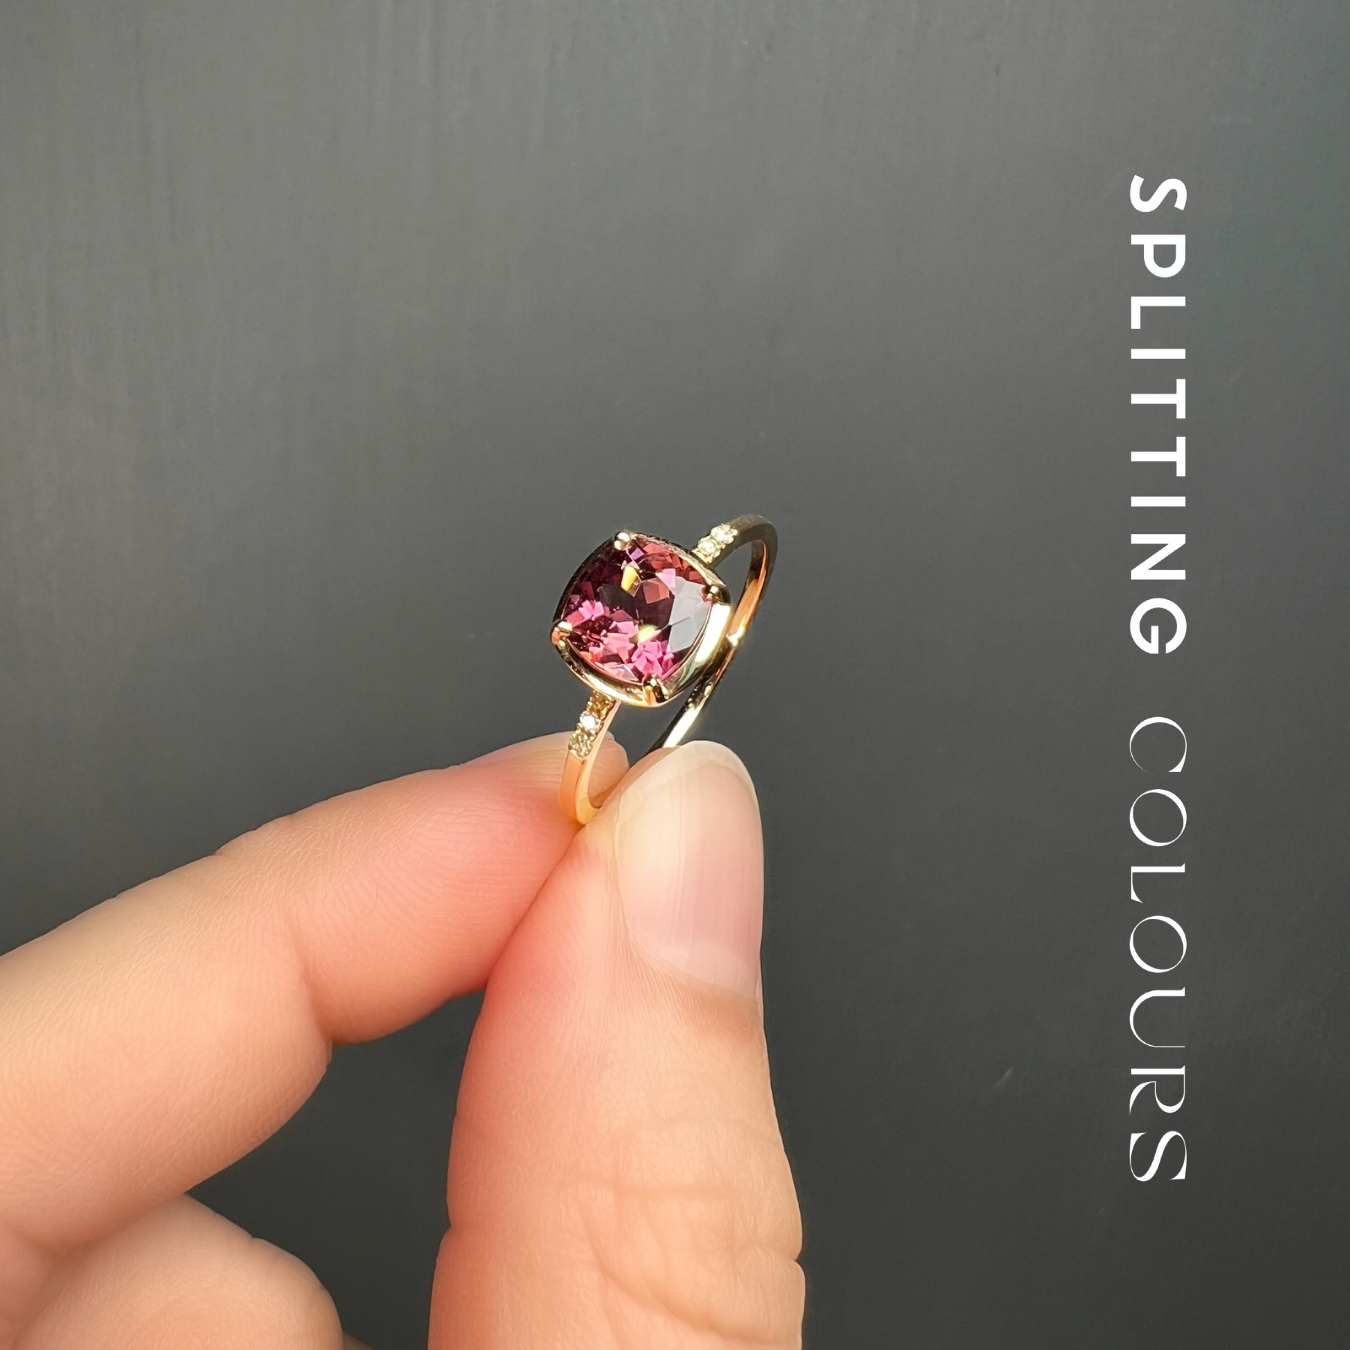 The Mono Stackable Ring - 1.16ct Strawberry Pink Tourmaline